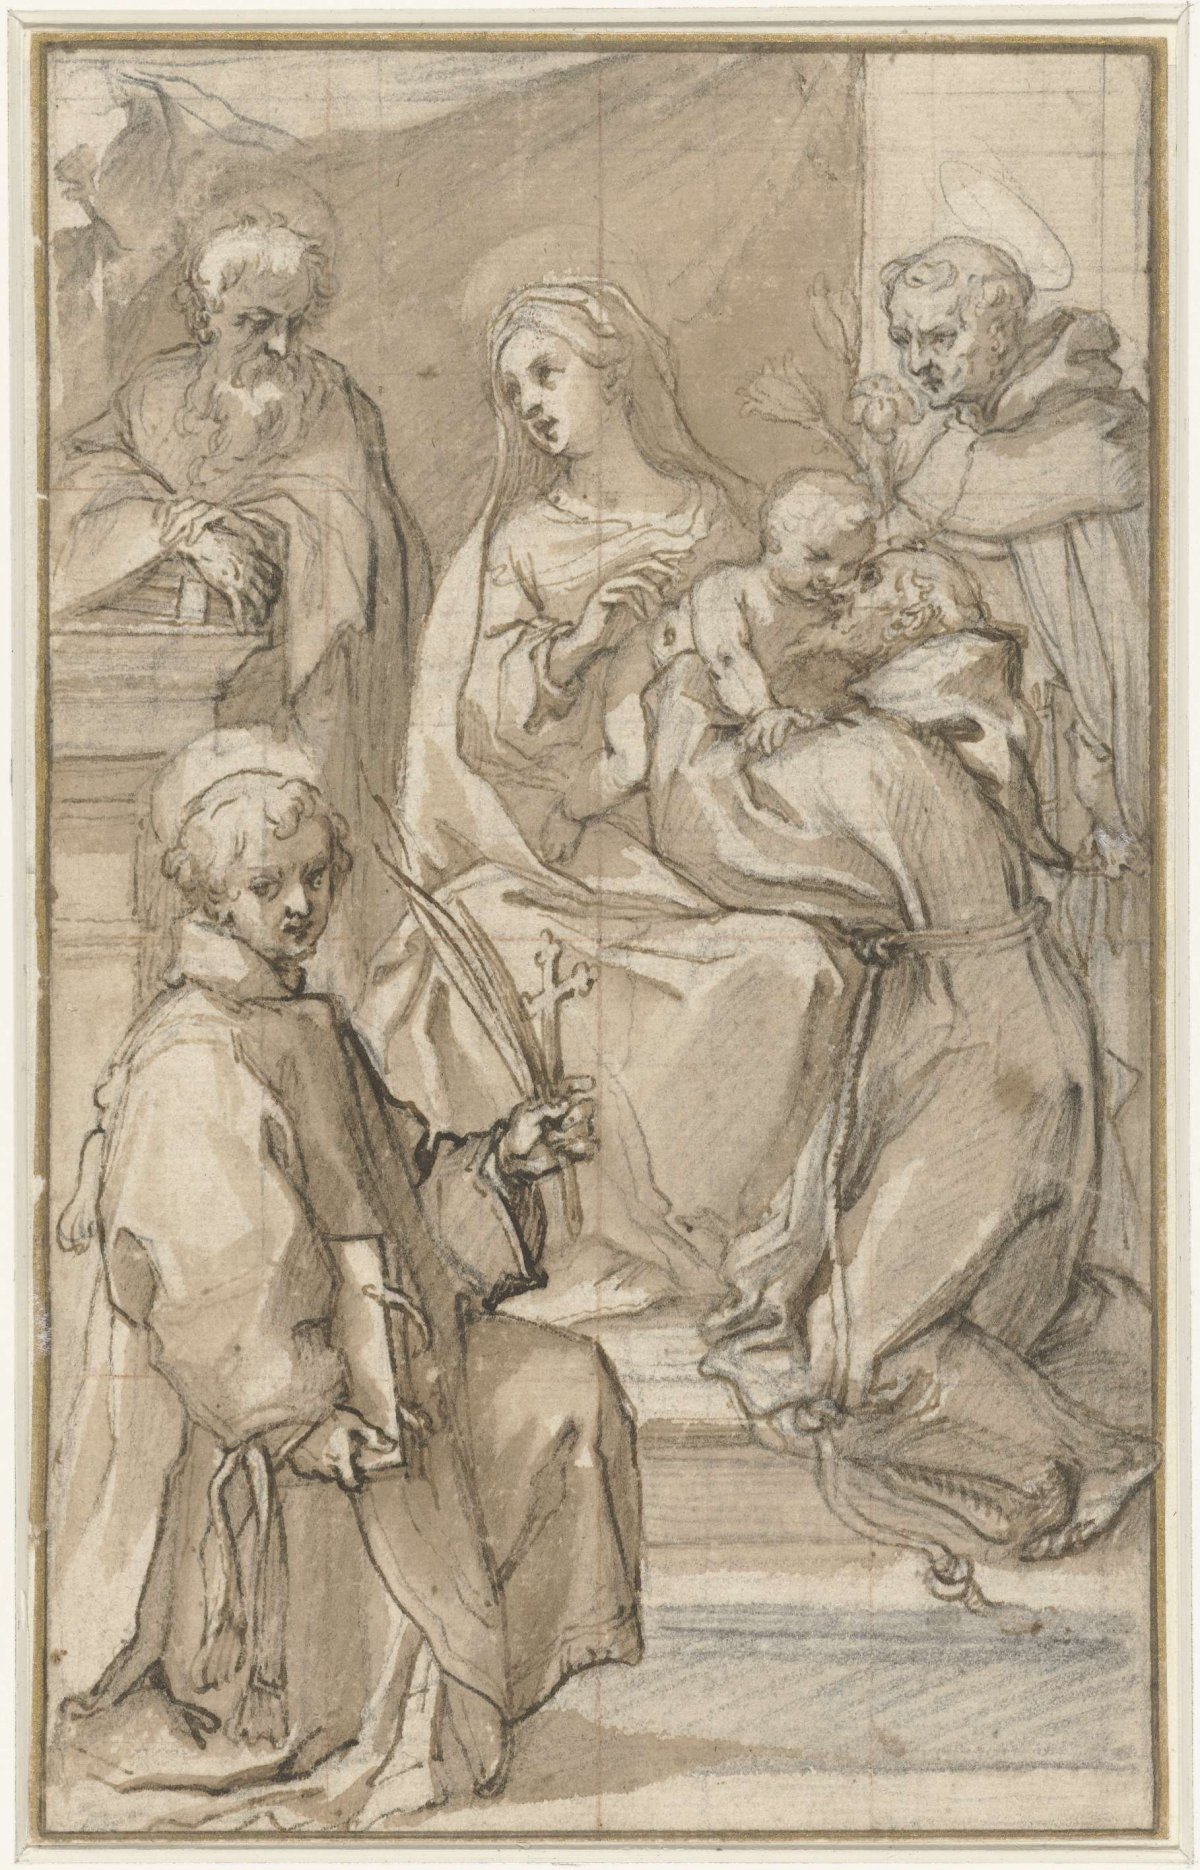 Design for an altarpiece featuring the Holy Family and Saints, Francesco Vanni, c. 1590 - c. 1595